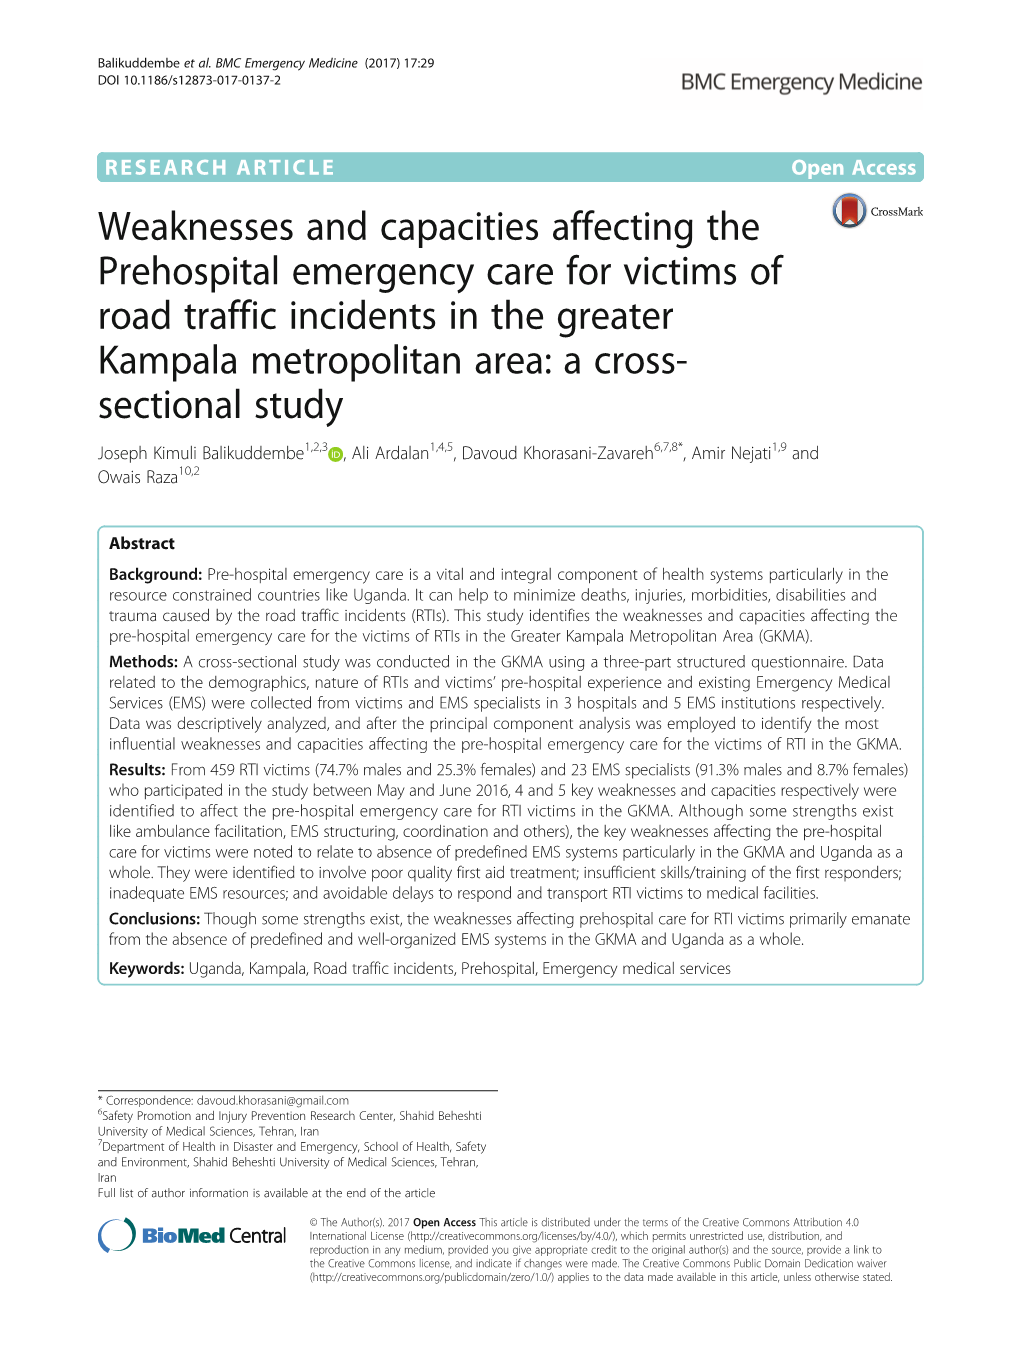 Weaknesses and Capacities Affecting the Prehospital Emergency Care For